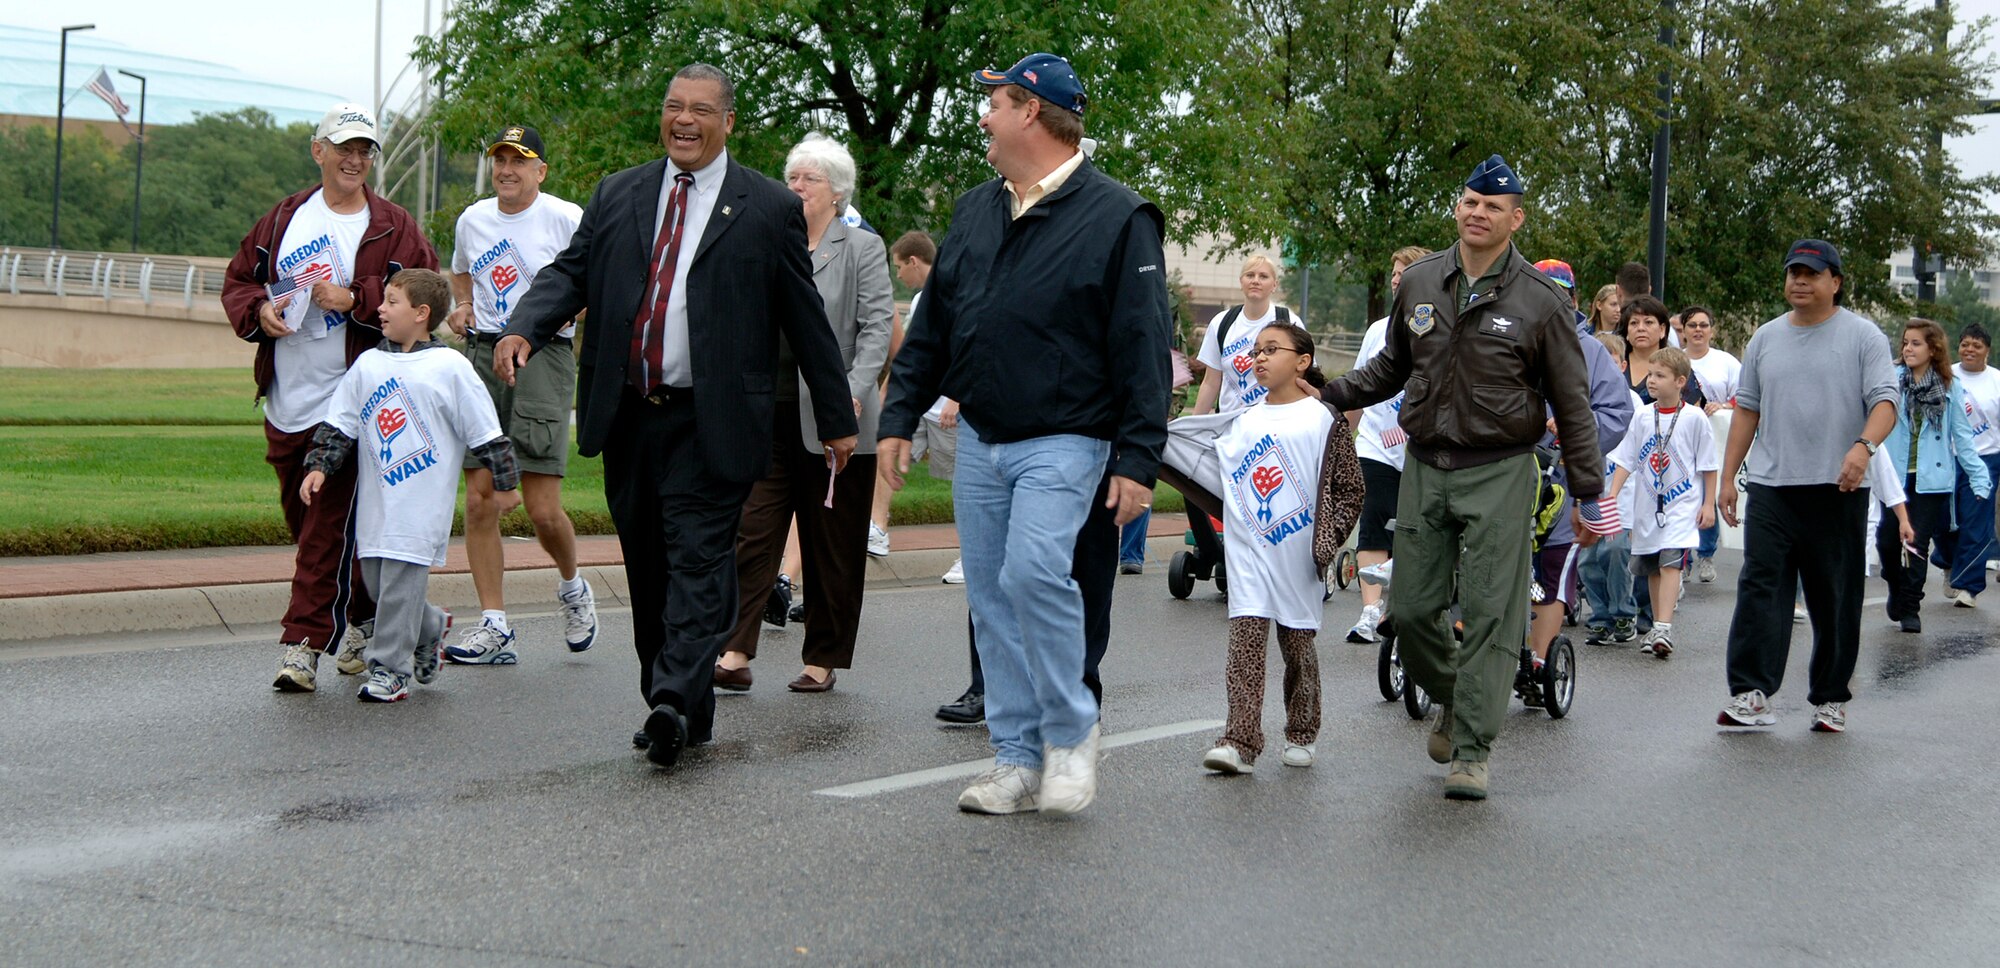 MCCONNELL AIR FORCE BASE, Kan. -- Members from Wichita, surrounding communities, Air Force, Army, Marines and Navy came to participate in the first Wichita “America Supports You” Freedom Walk in downtown Wichita, Sept. 13.  It is a time to remember the first responders, honor veterans past and present, and our commitment to freedom and values of our country. (Photo by Staff Sgt. Ronald Lafosse)